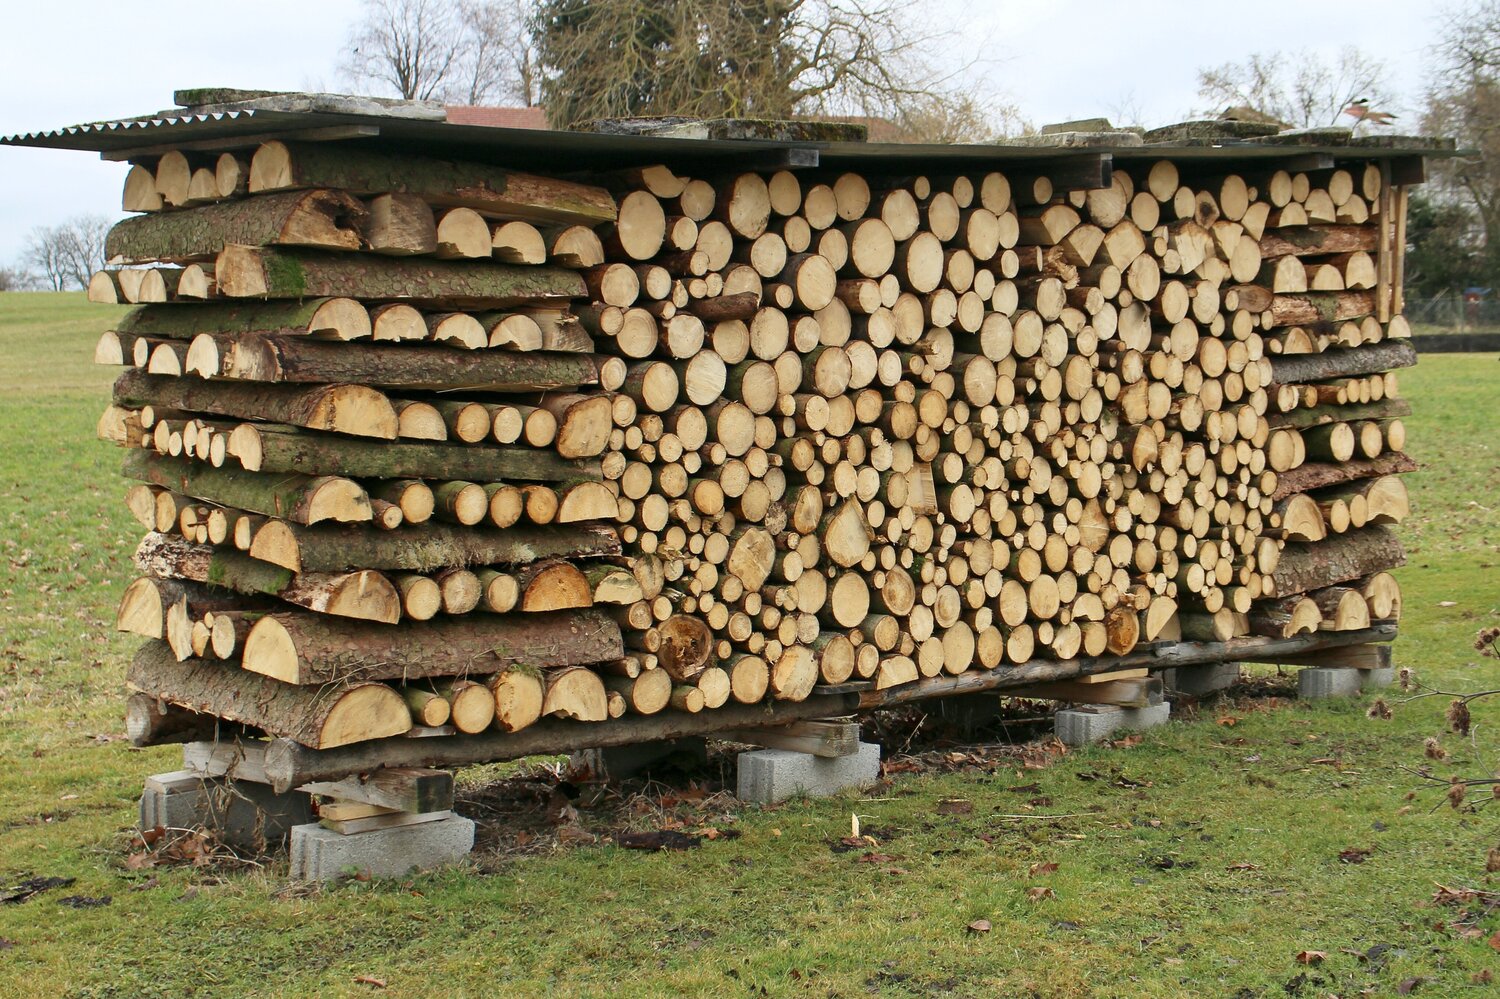 A+traditional+firewood+stack+must+be+elevated+of+the+ground+to+prevent+moisture+from+infiltrating+the+pile